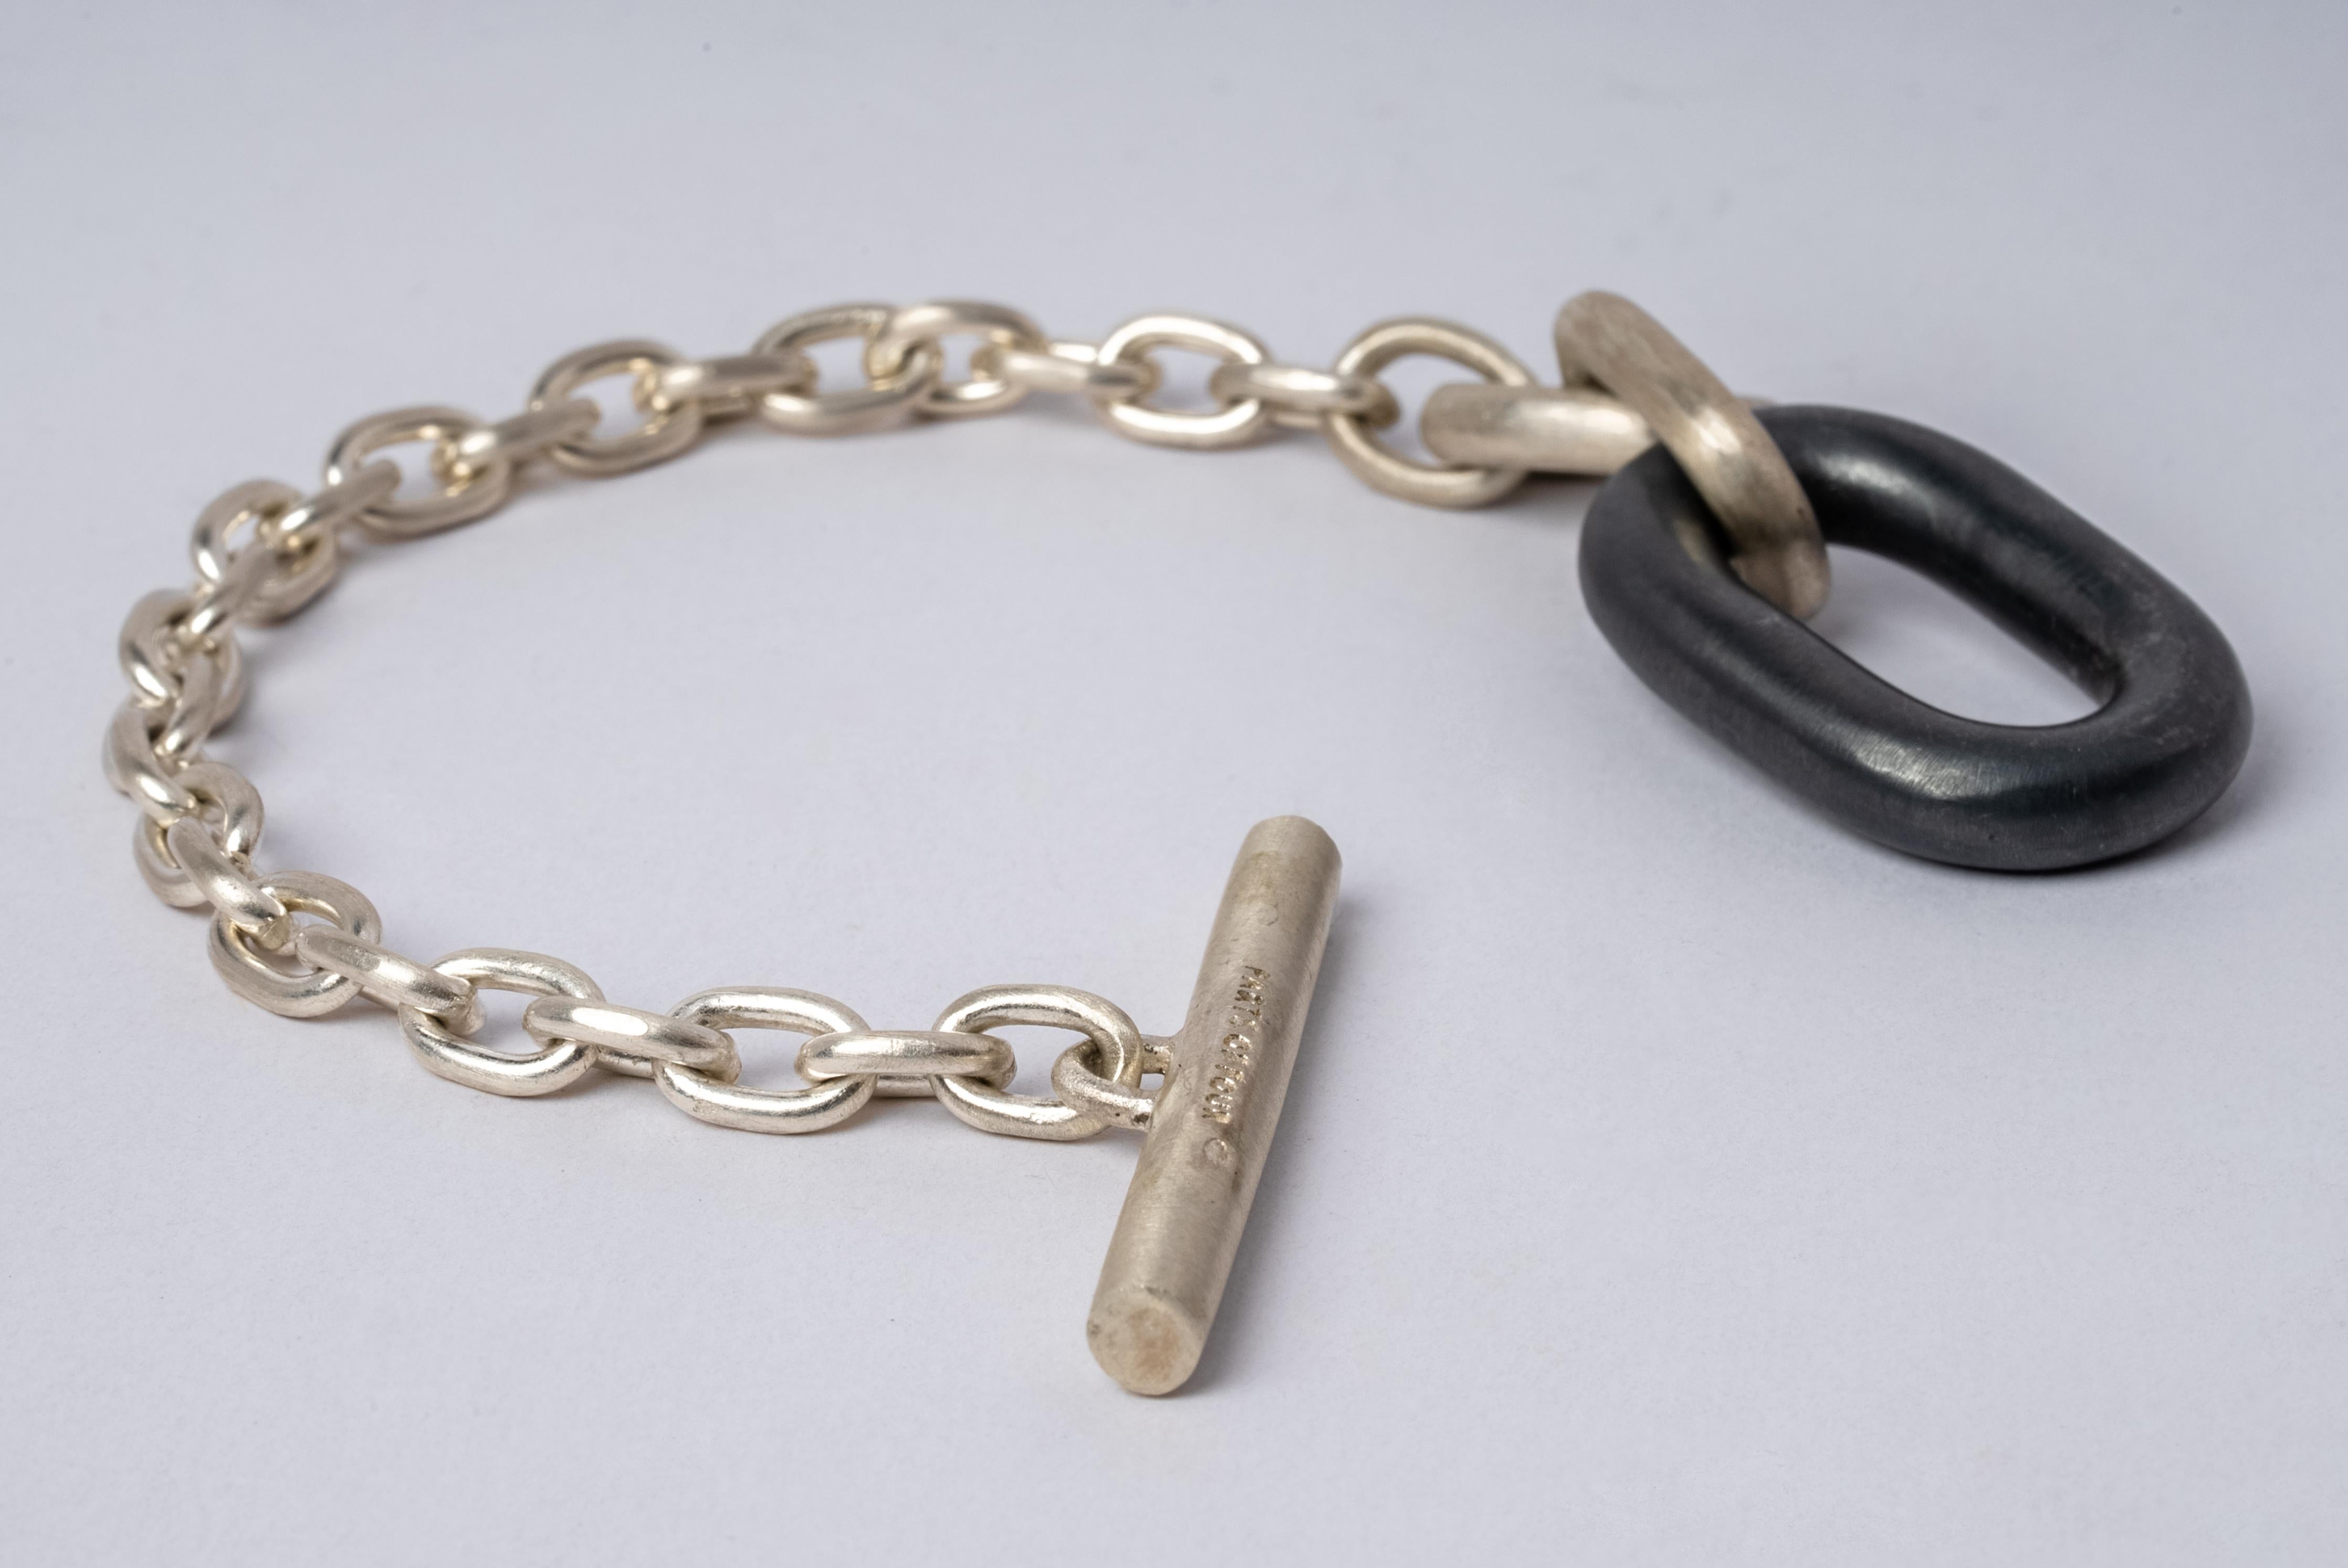 Bracelet in oxidized sterling silver toggle and matte sterling silver chain. Black sterling silver finish may fade over time, which can be cosidered an enhancement. Please note that Black Sterling tends to appear darker in photograph than in